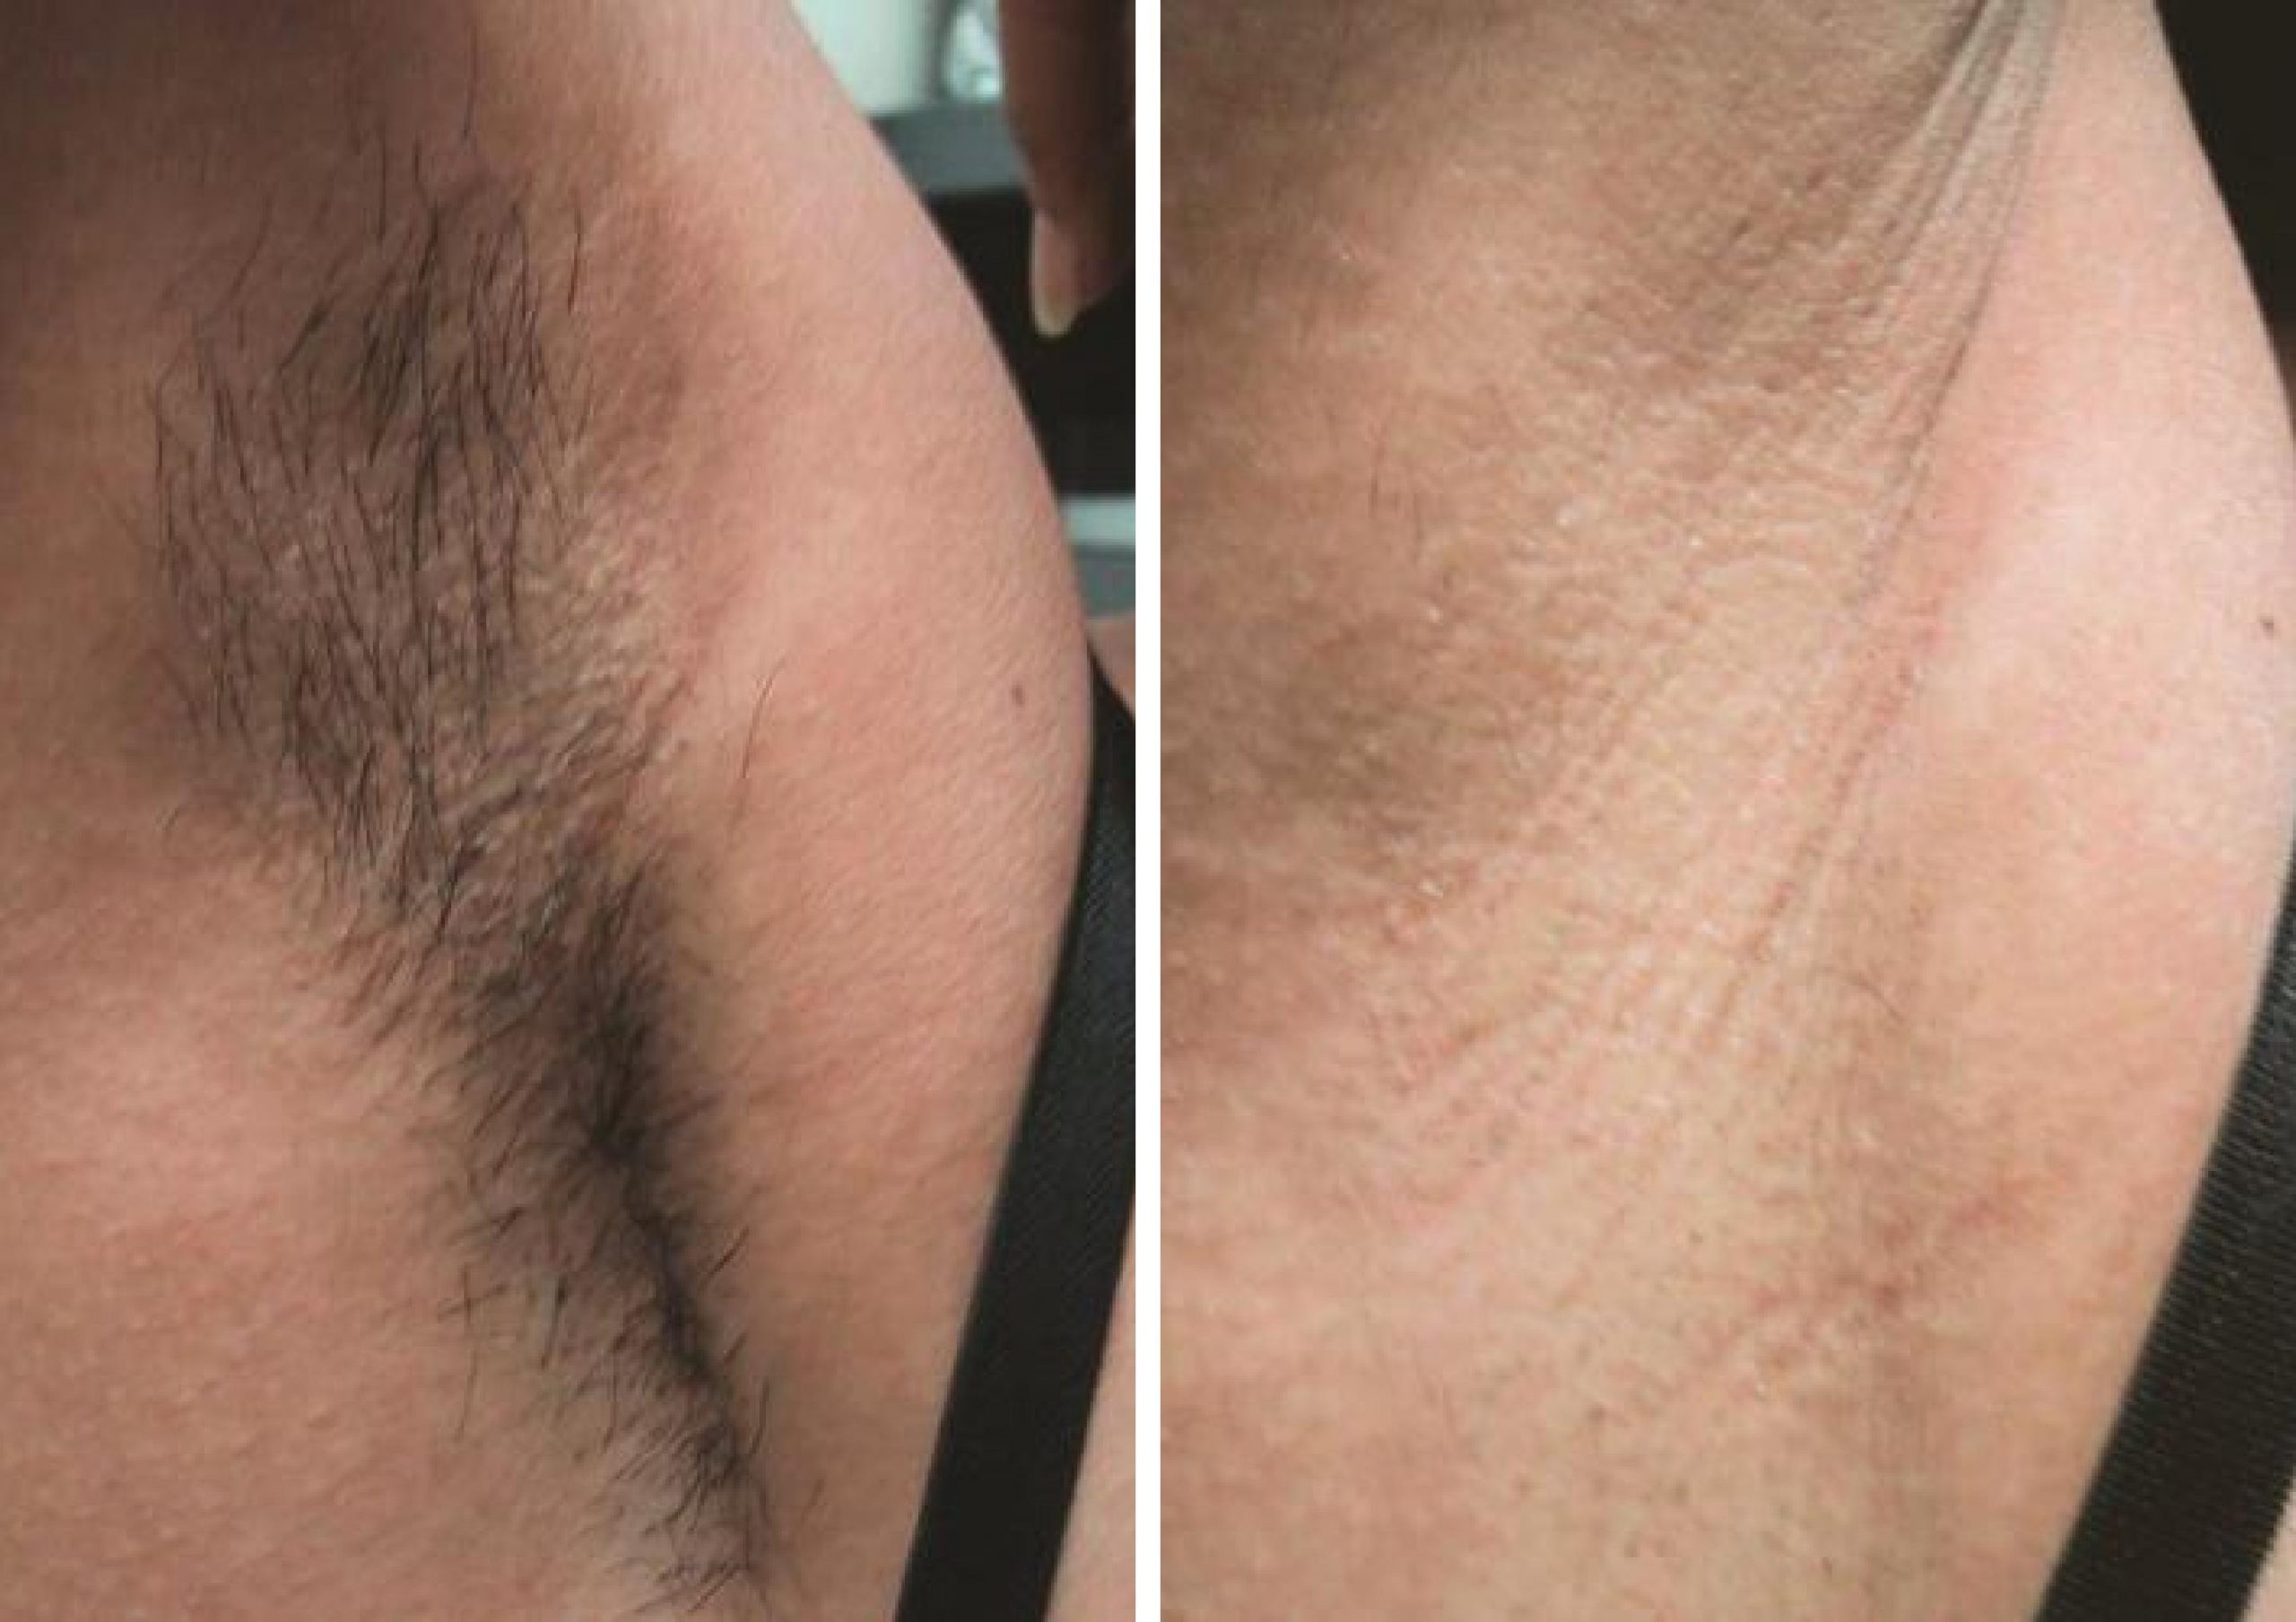 Laser Hair Removal before and after treatment to armpit area.